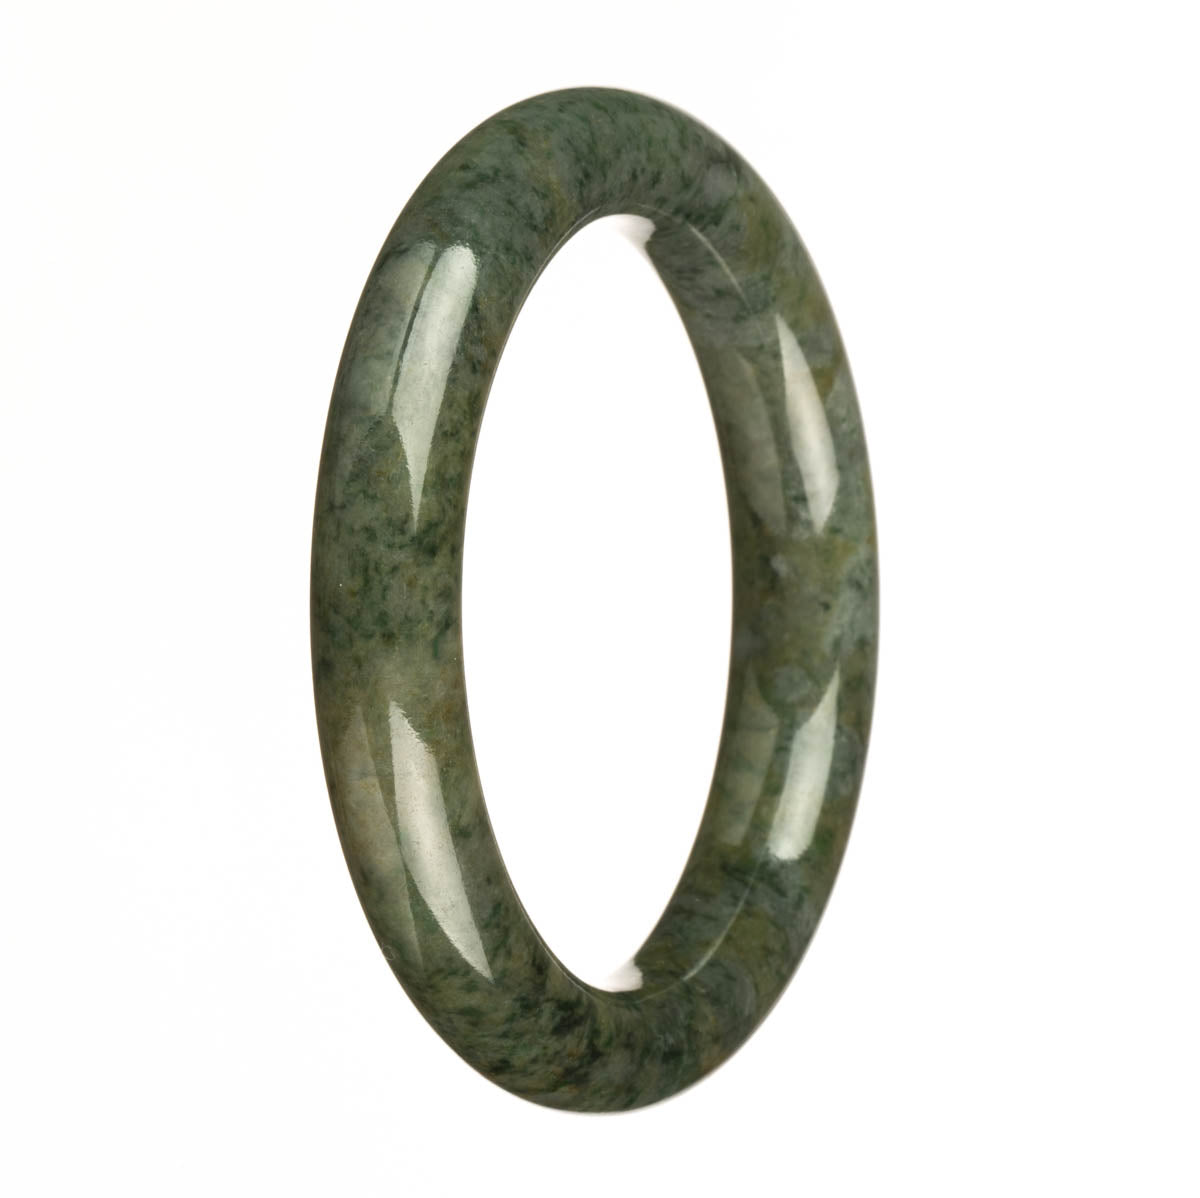 A small, round jade bangle with dark green color and apple green spots, made from genuine Grade A jade.